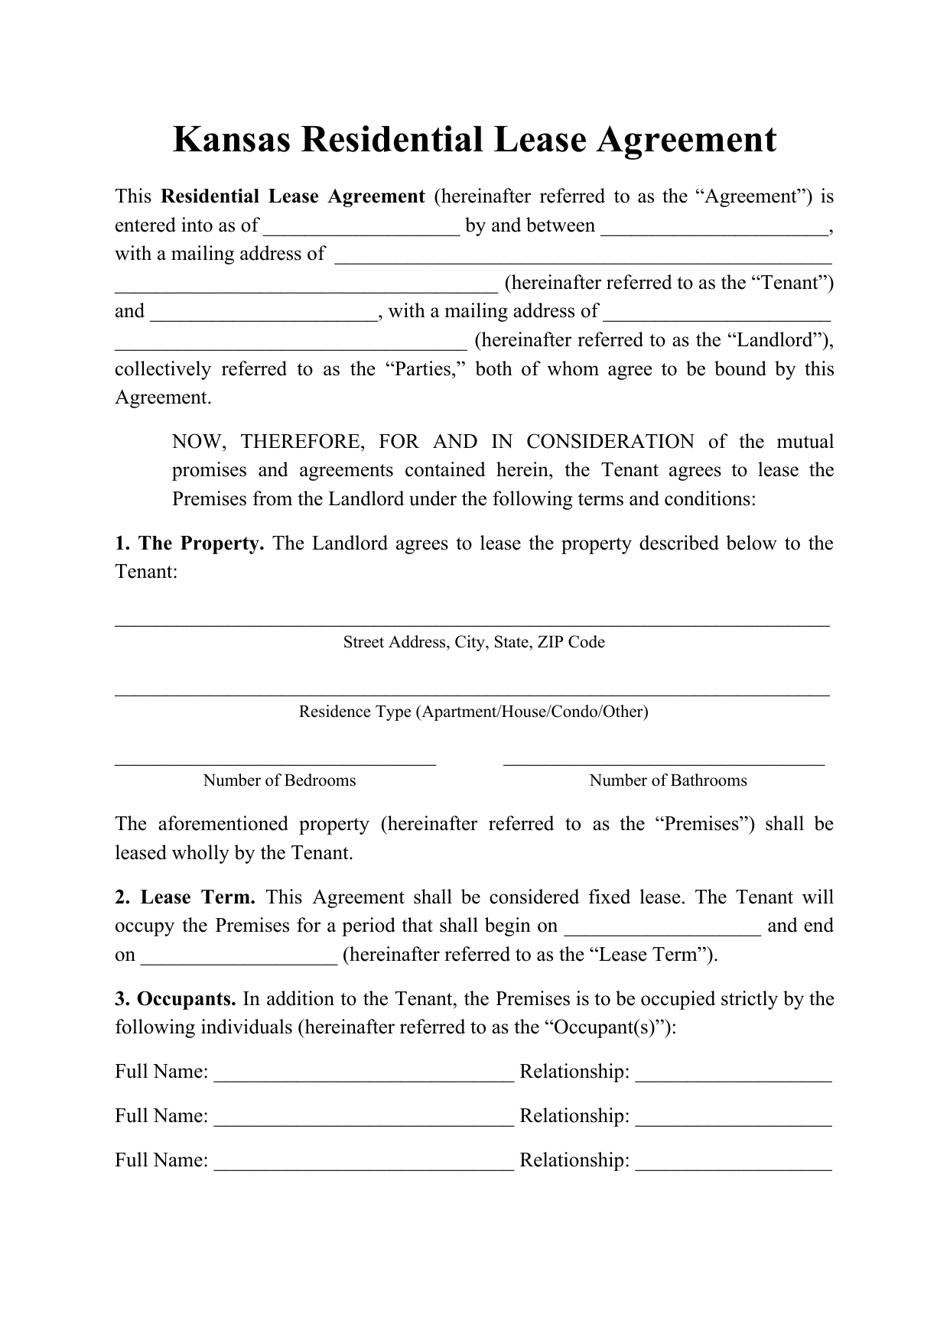 Residential Lease Agreement Template - Kansas, Page 1